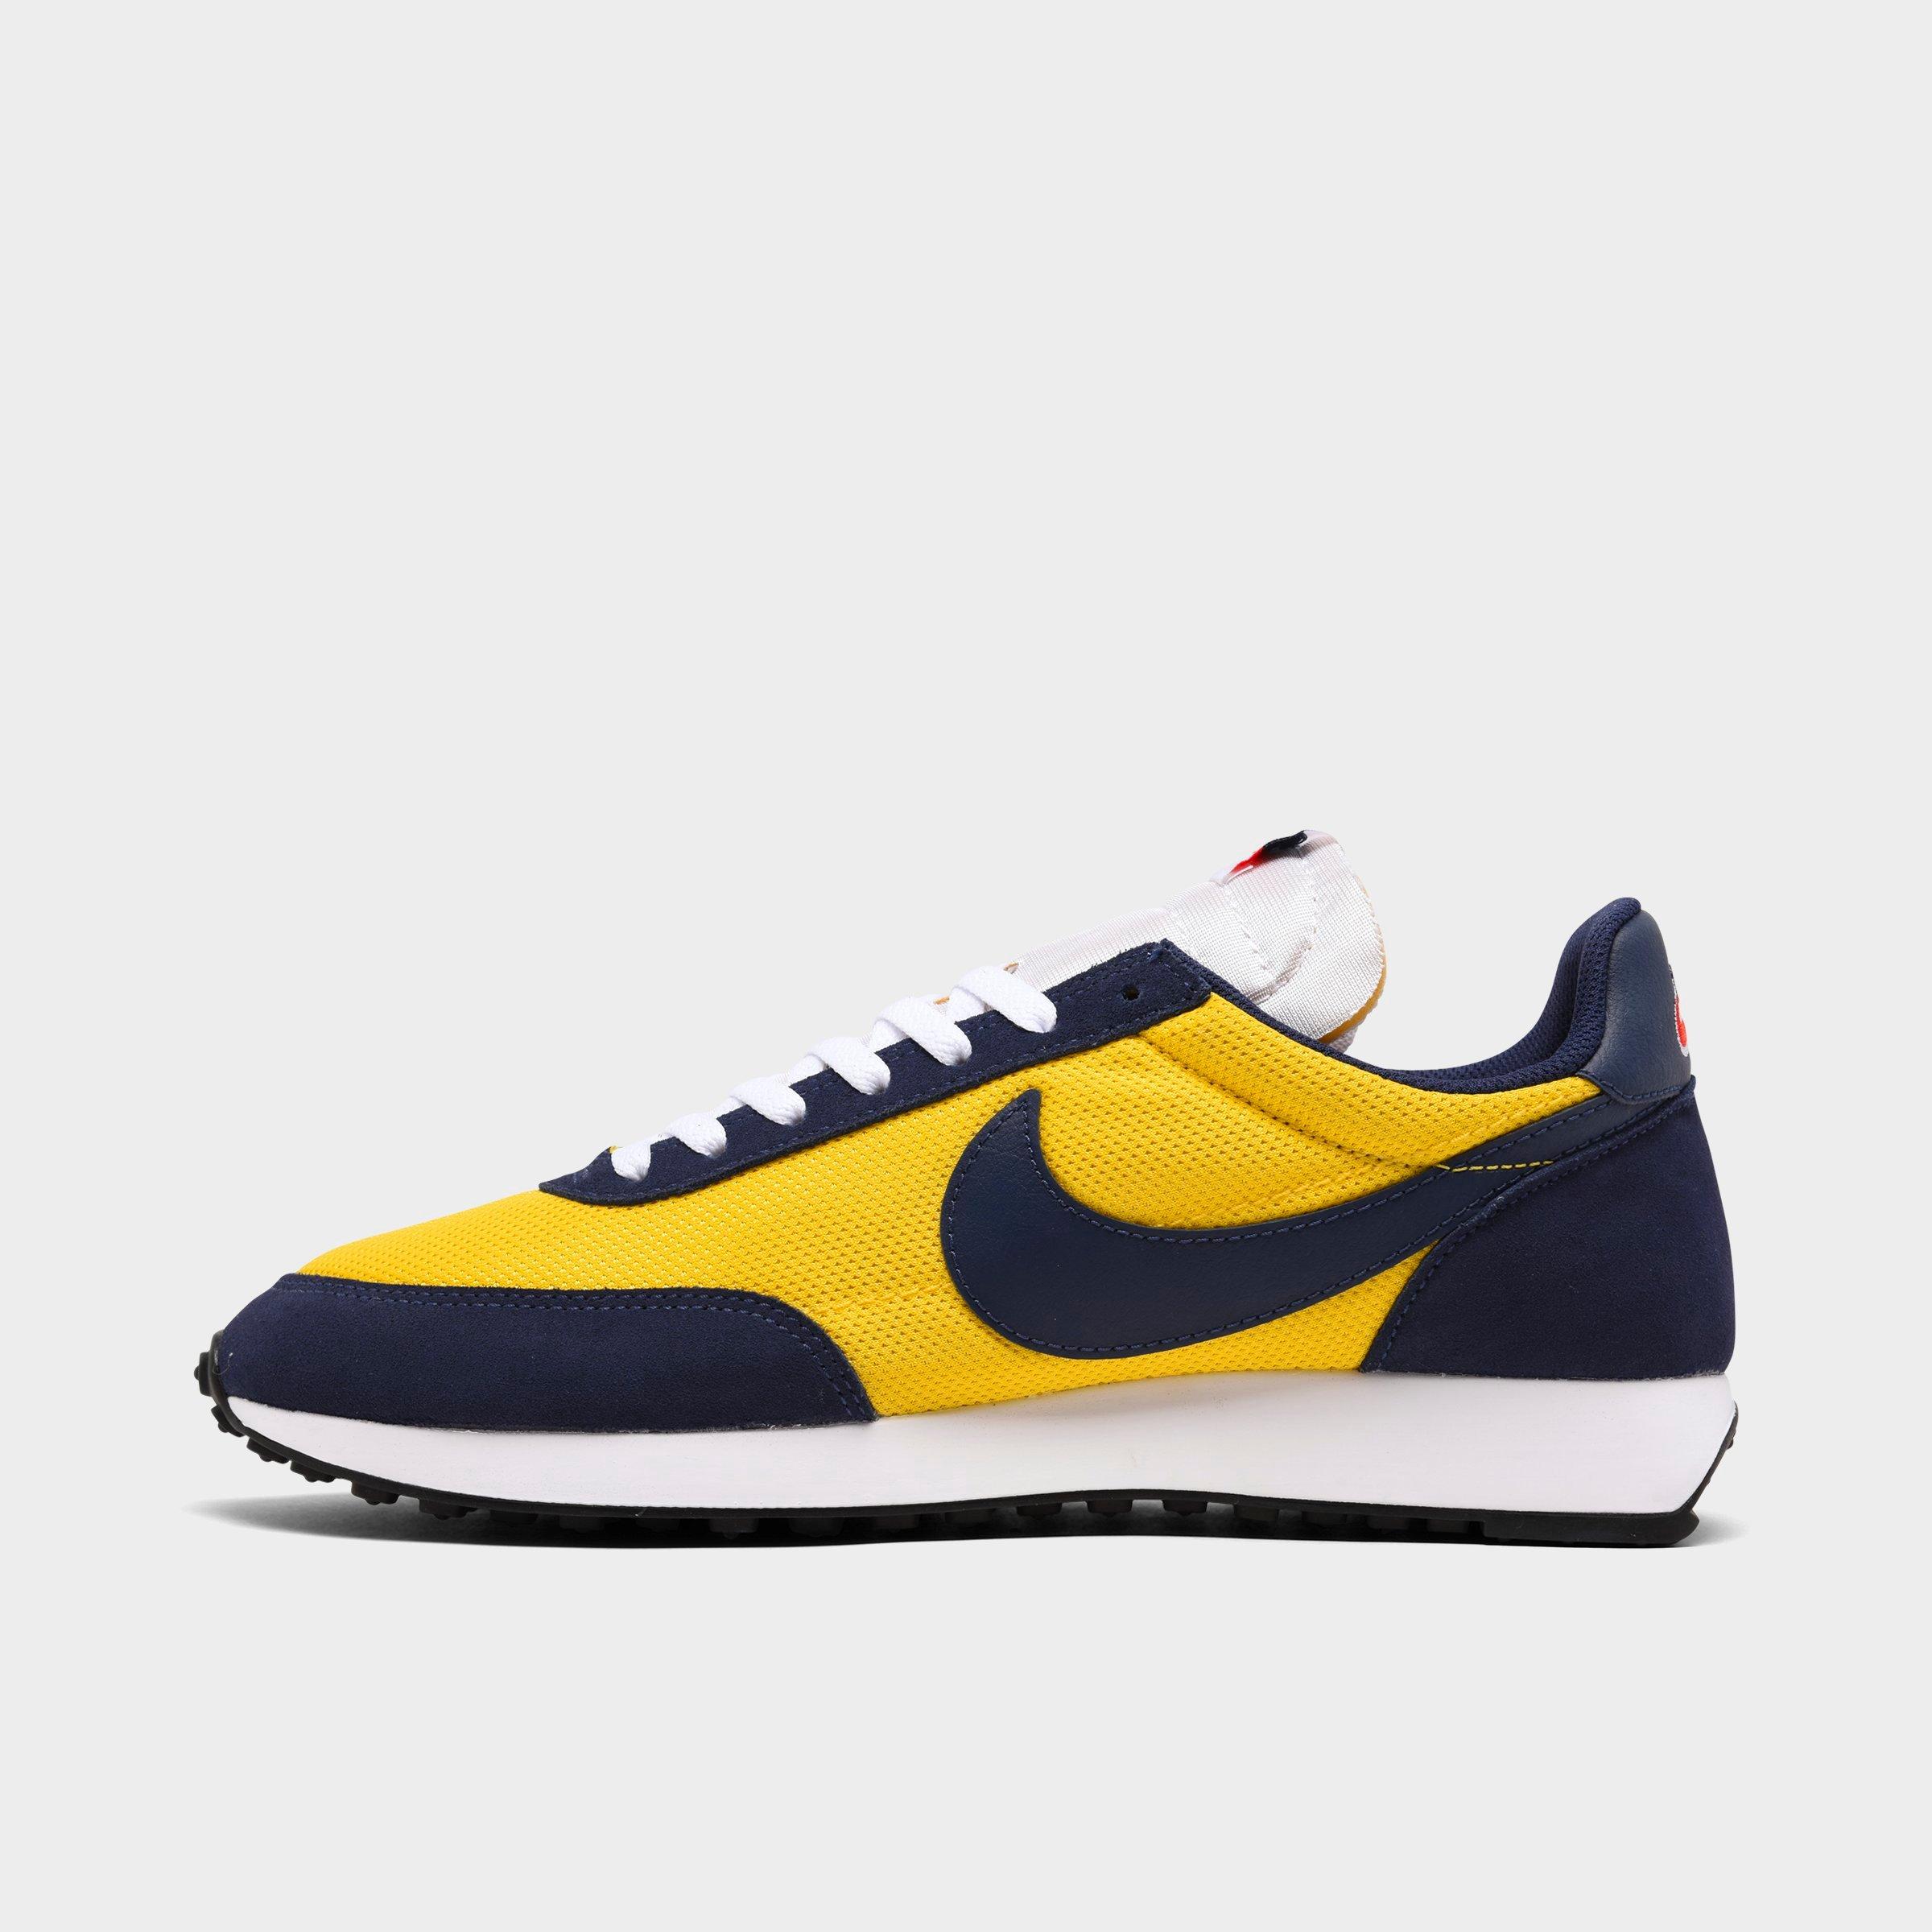 Men's Nike Air Tailwind 79 Casual Shoes 